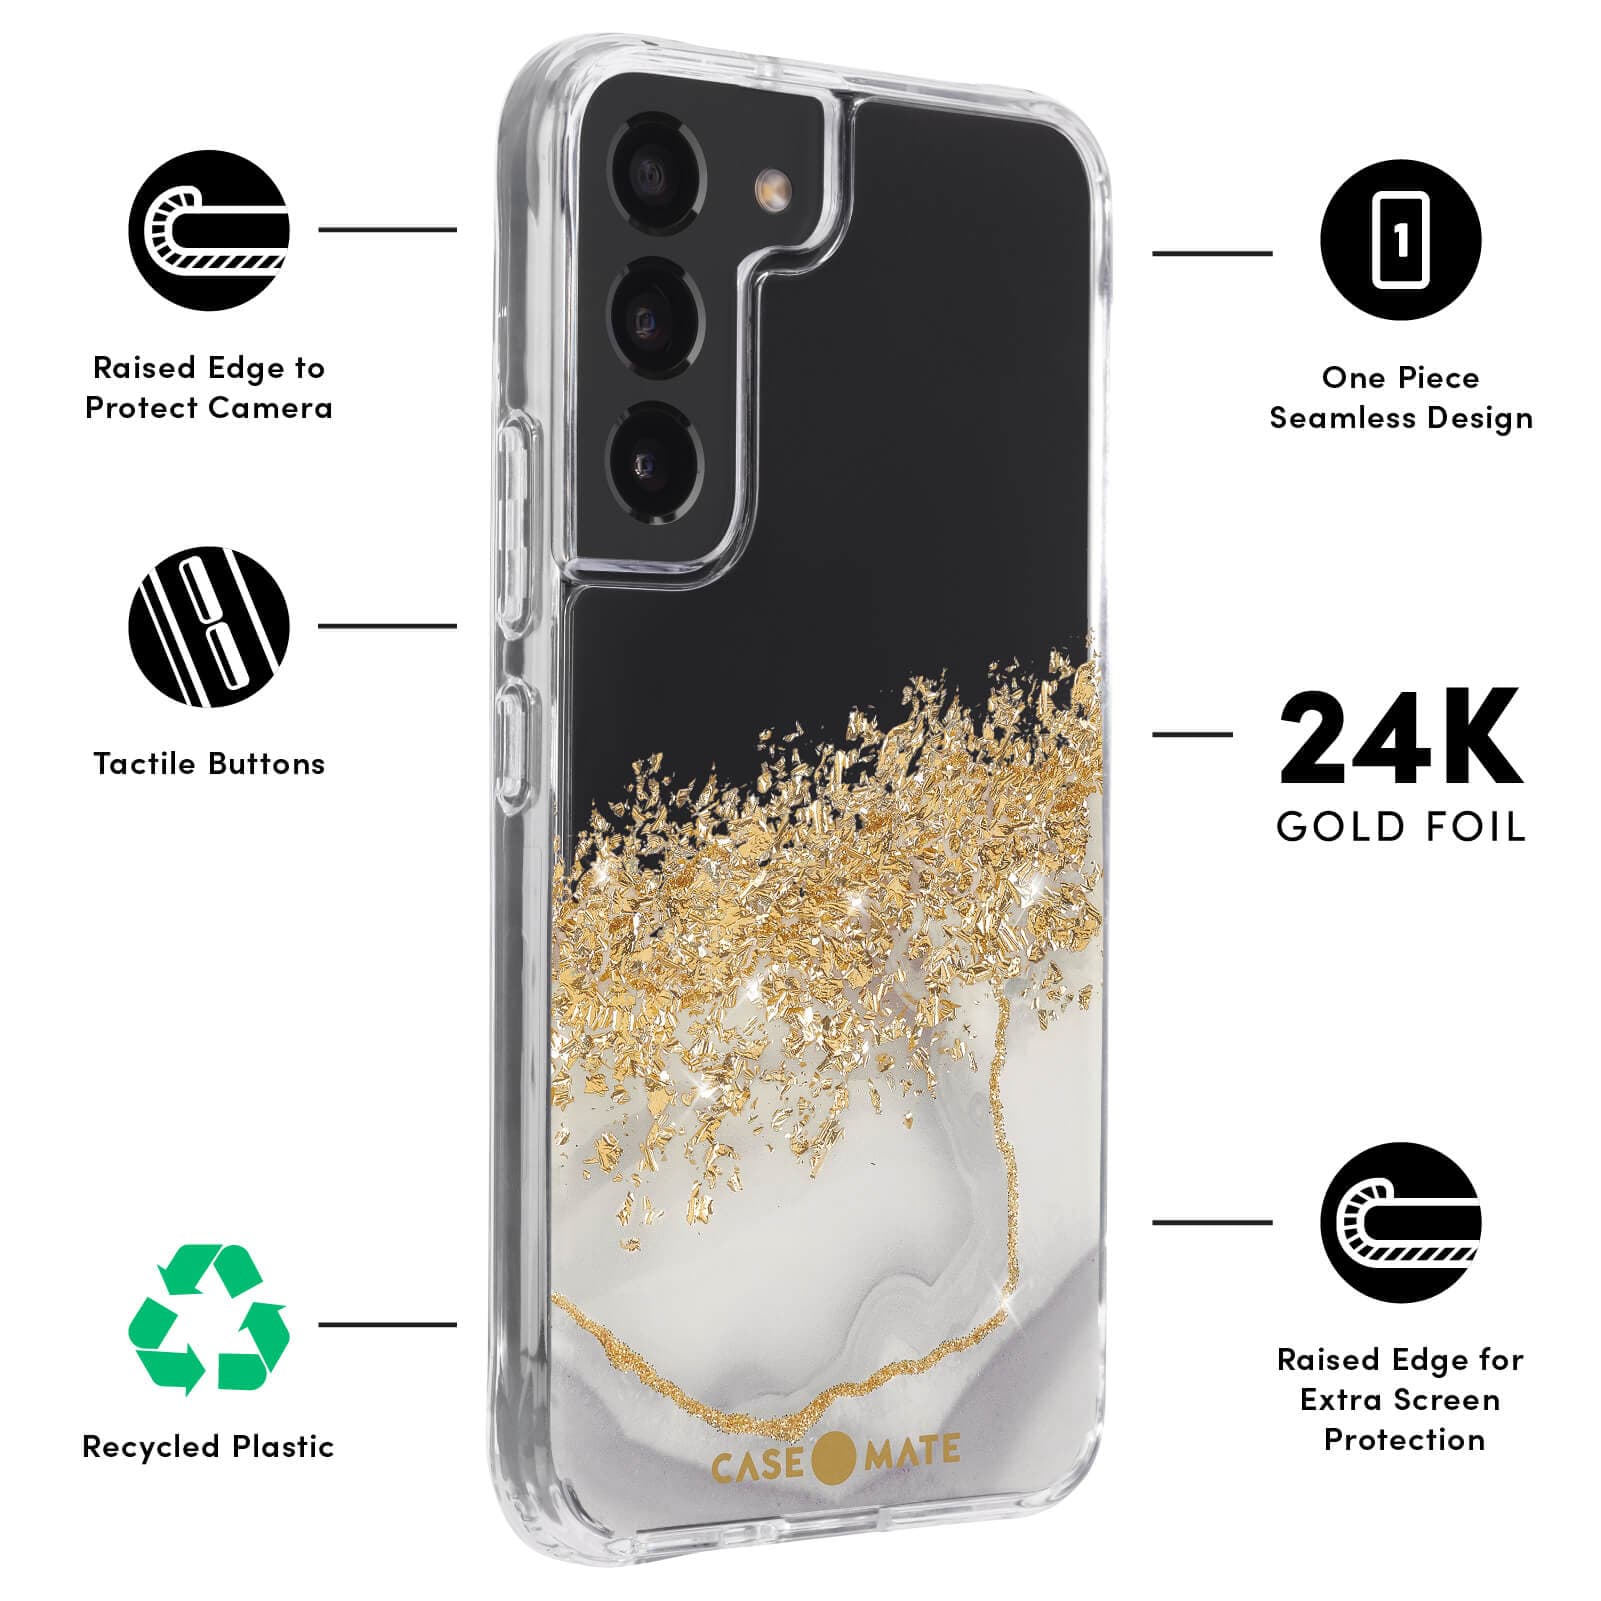 RAISED EDGE TO PROTECT CAMERA, TACTILE BUTTONS, RECYCLED PLASIC, ONE PIECE SEAMLESS DESIGN, 24K GOLD FOIL, RAISED EDGE FOR EXTRA SCREEN PROTECTION. COLOR::KARAT MARBLE